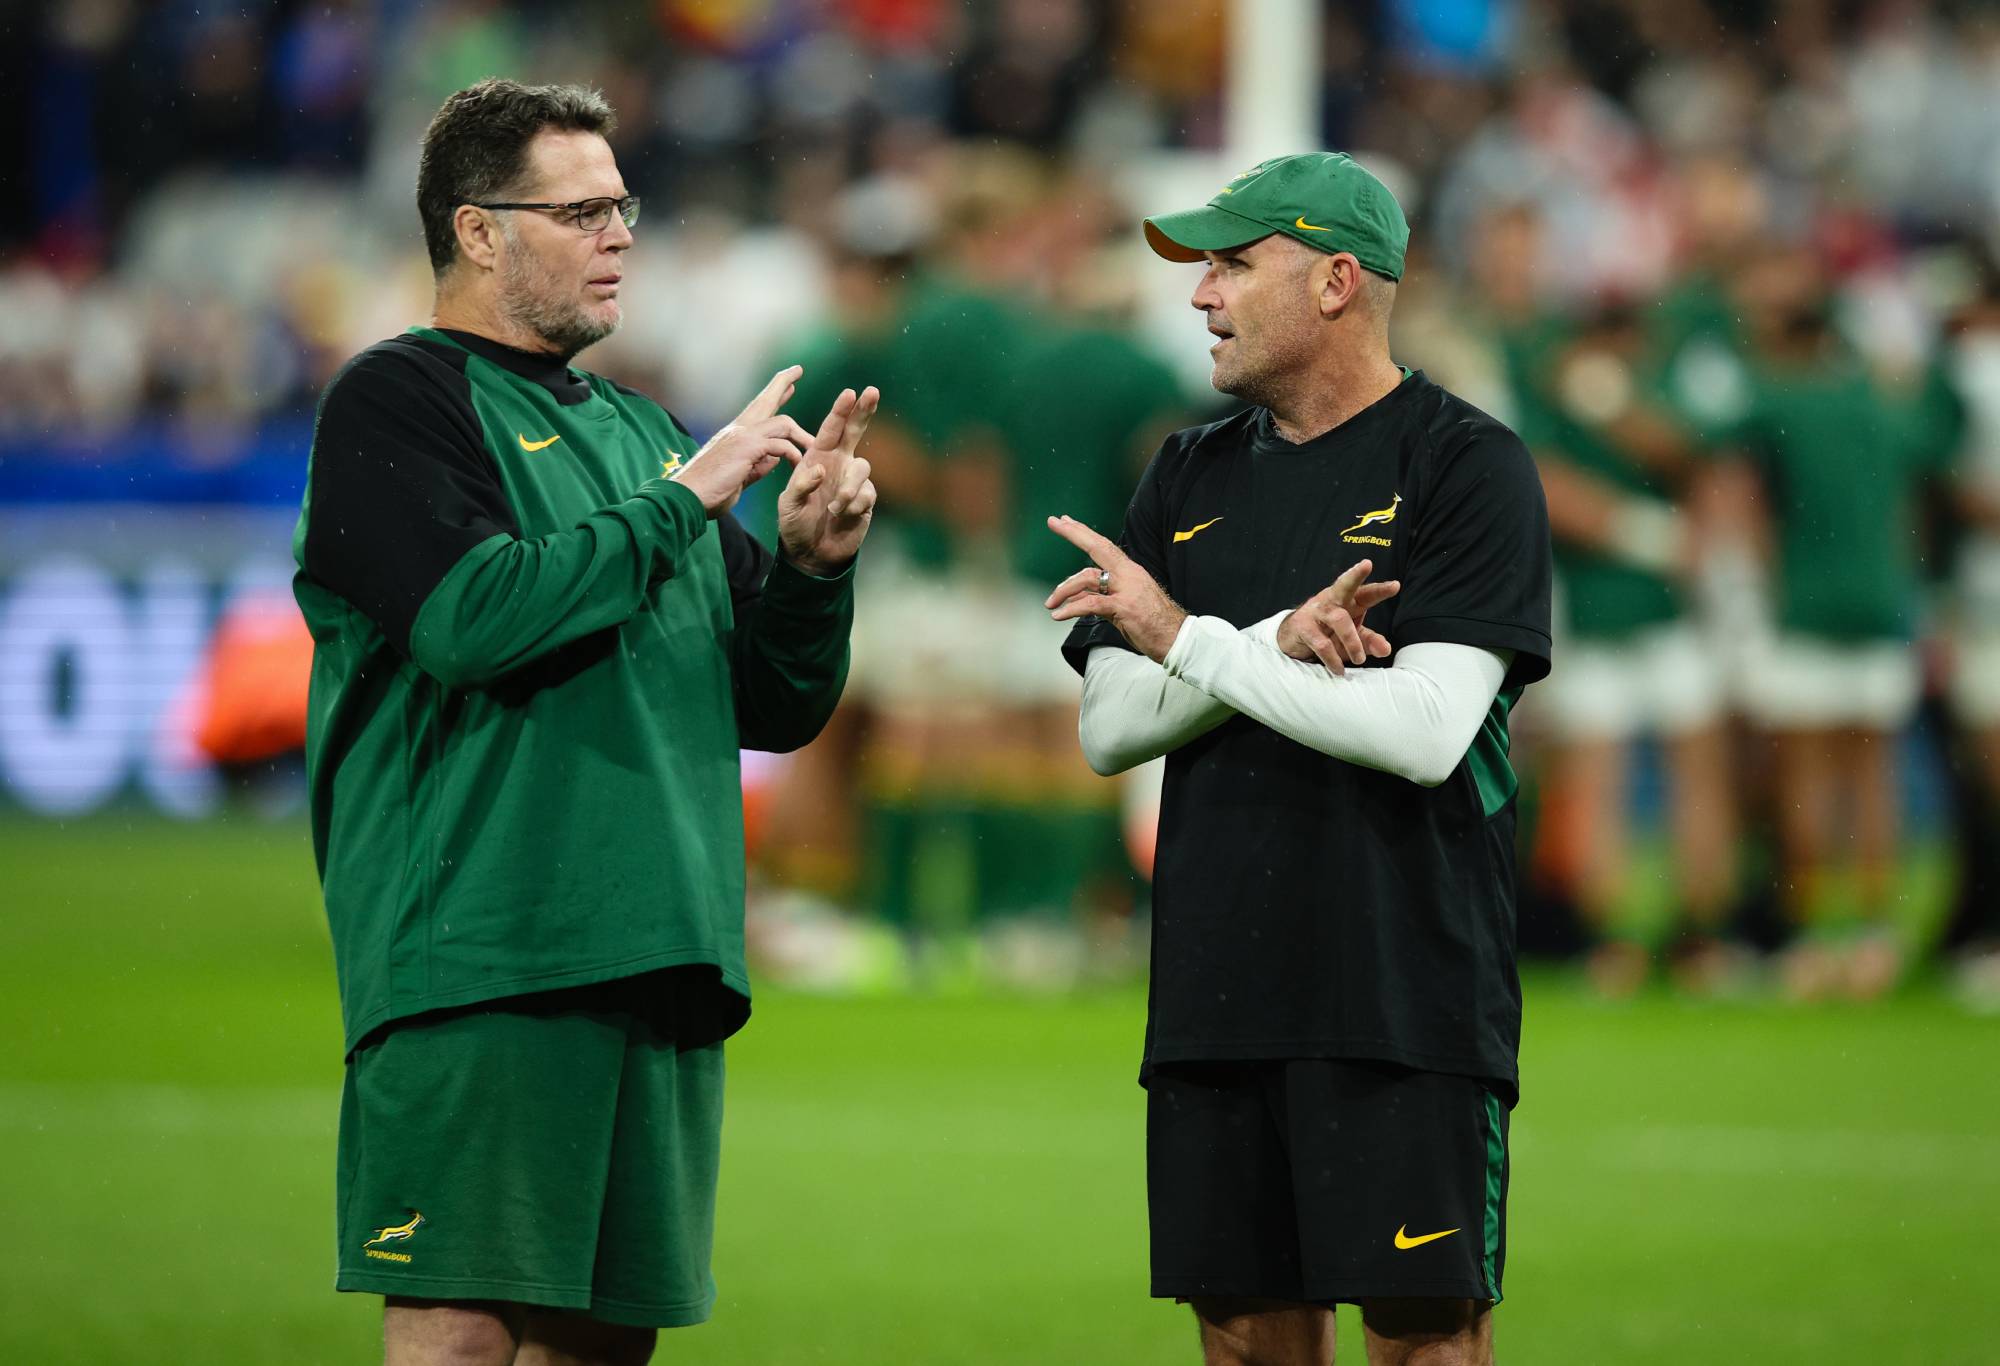 South Africa Director of Rugby Rassie Erasmus talks to South Africa Head Coach Jacques Nienaber during the pre match warm up ahead of the Rugby World Cup France 2023 match between England and South Africa at Stade de France on October 21, 2023 in Paris, France. (Photo by Craig Mercer/MB Media/Getty Images)